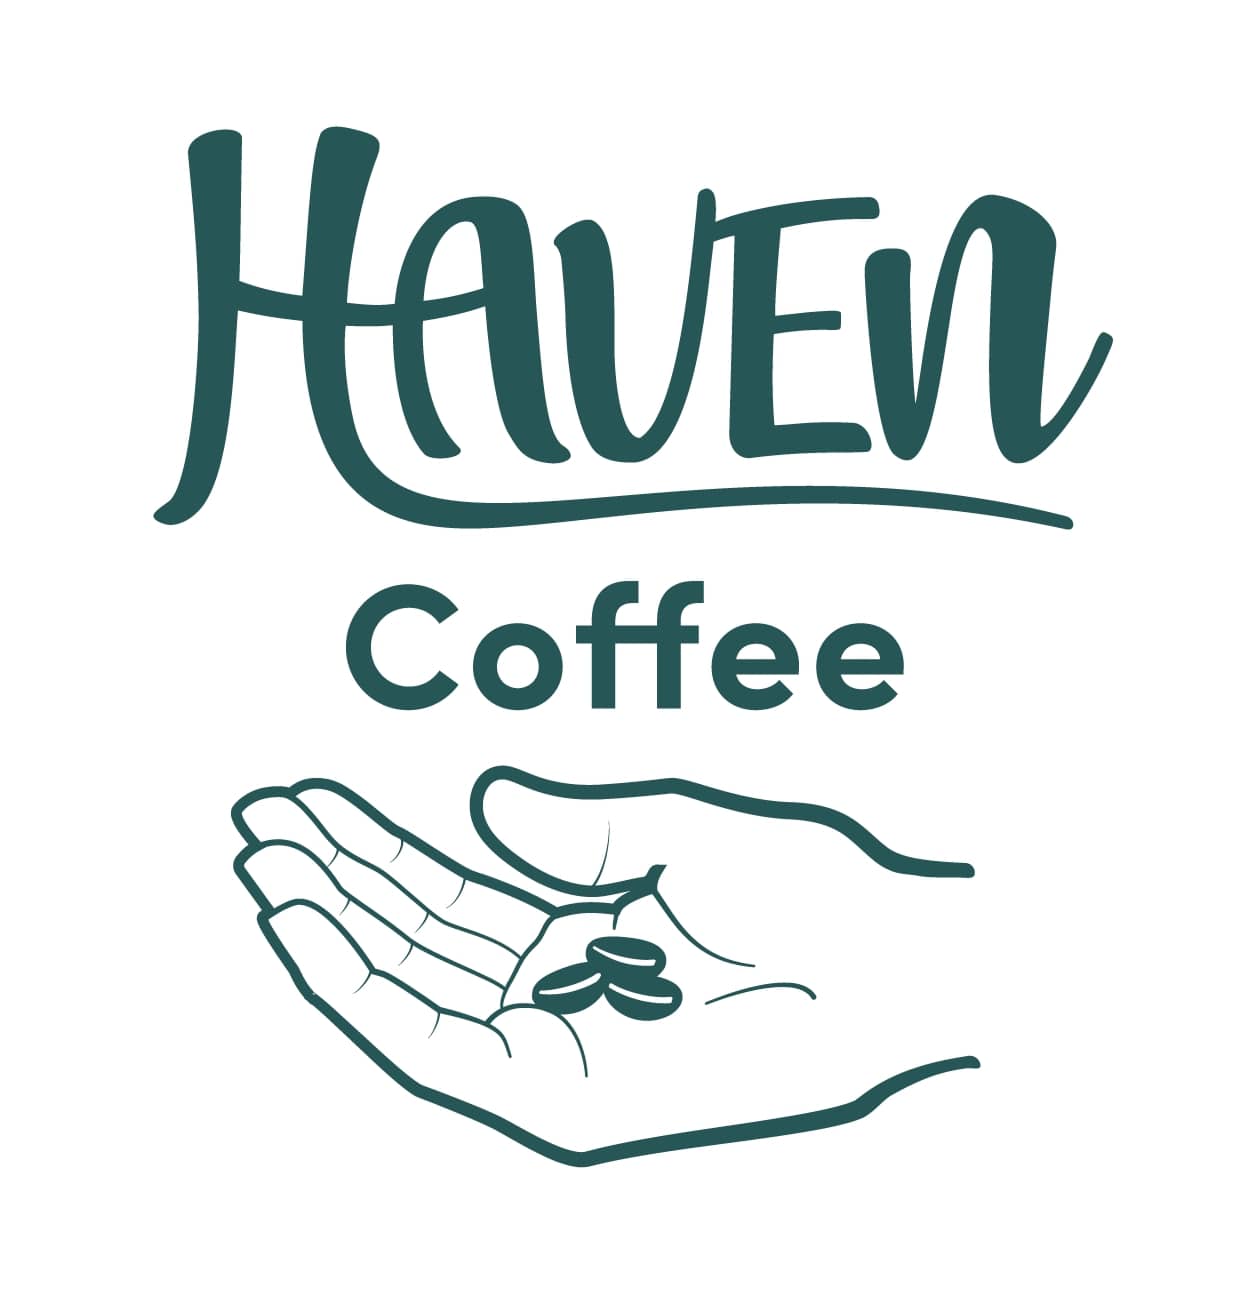 HAVEN Coffee